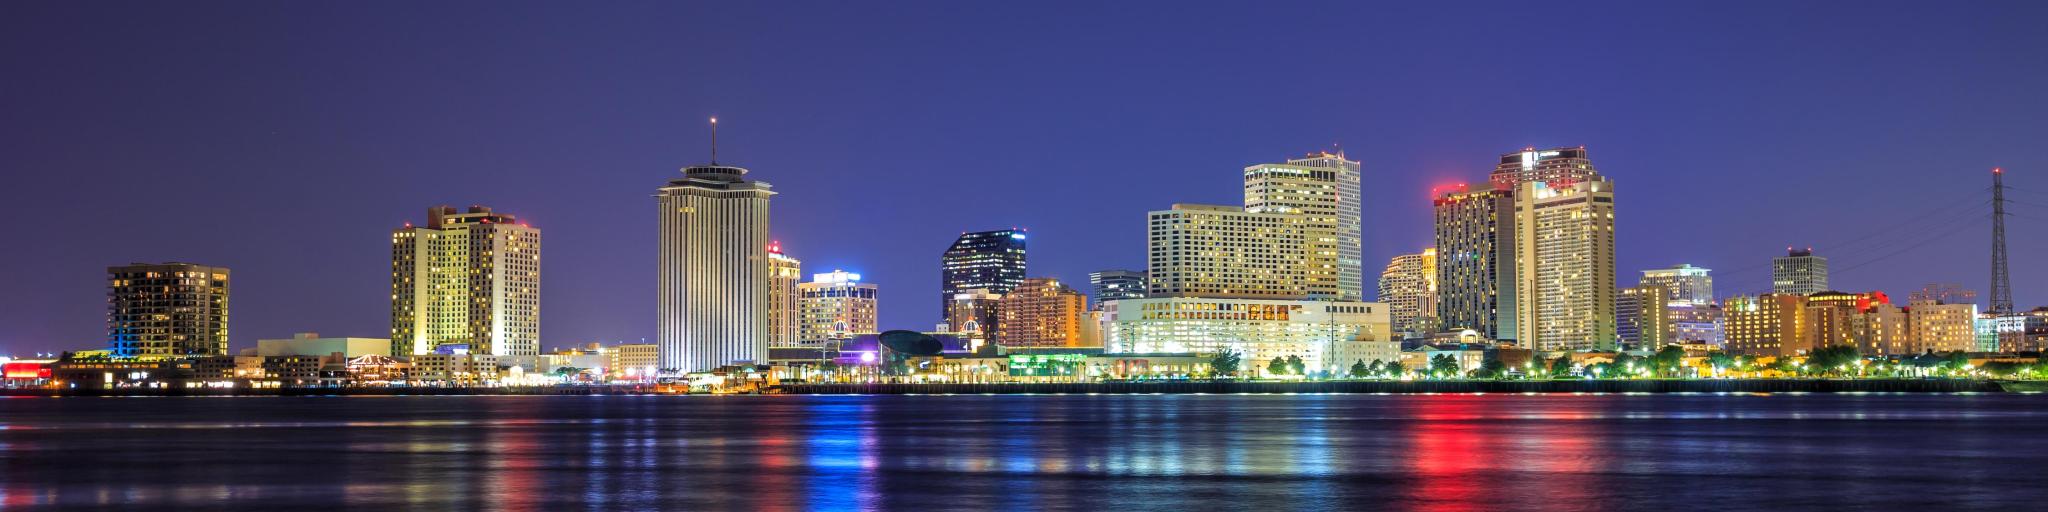 New Orleans, Louisiana, USA with the city downtown in the background and the Mississippi River in the foreground at twilight.